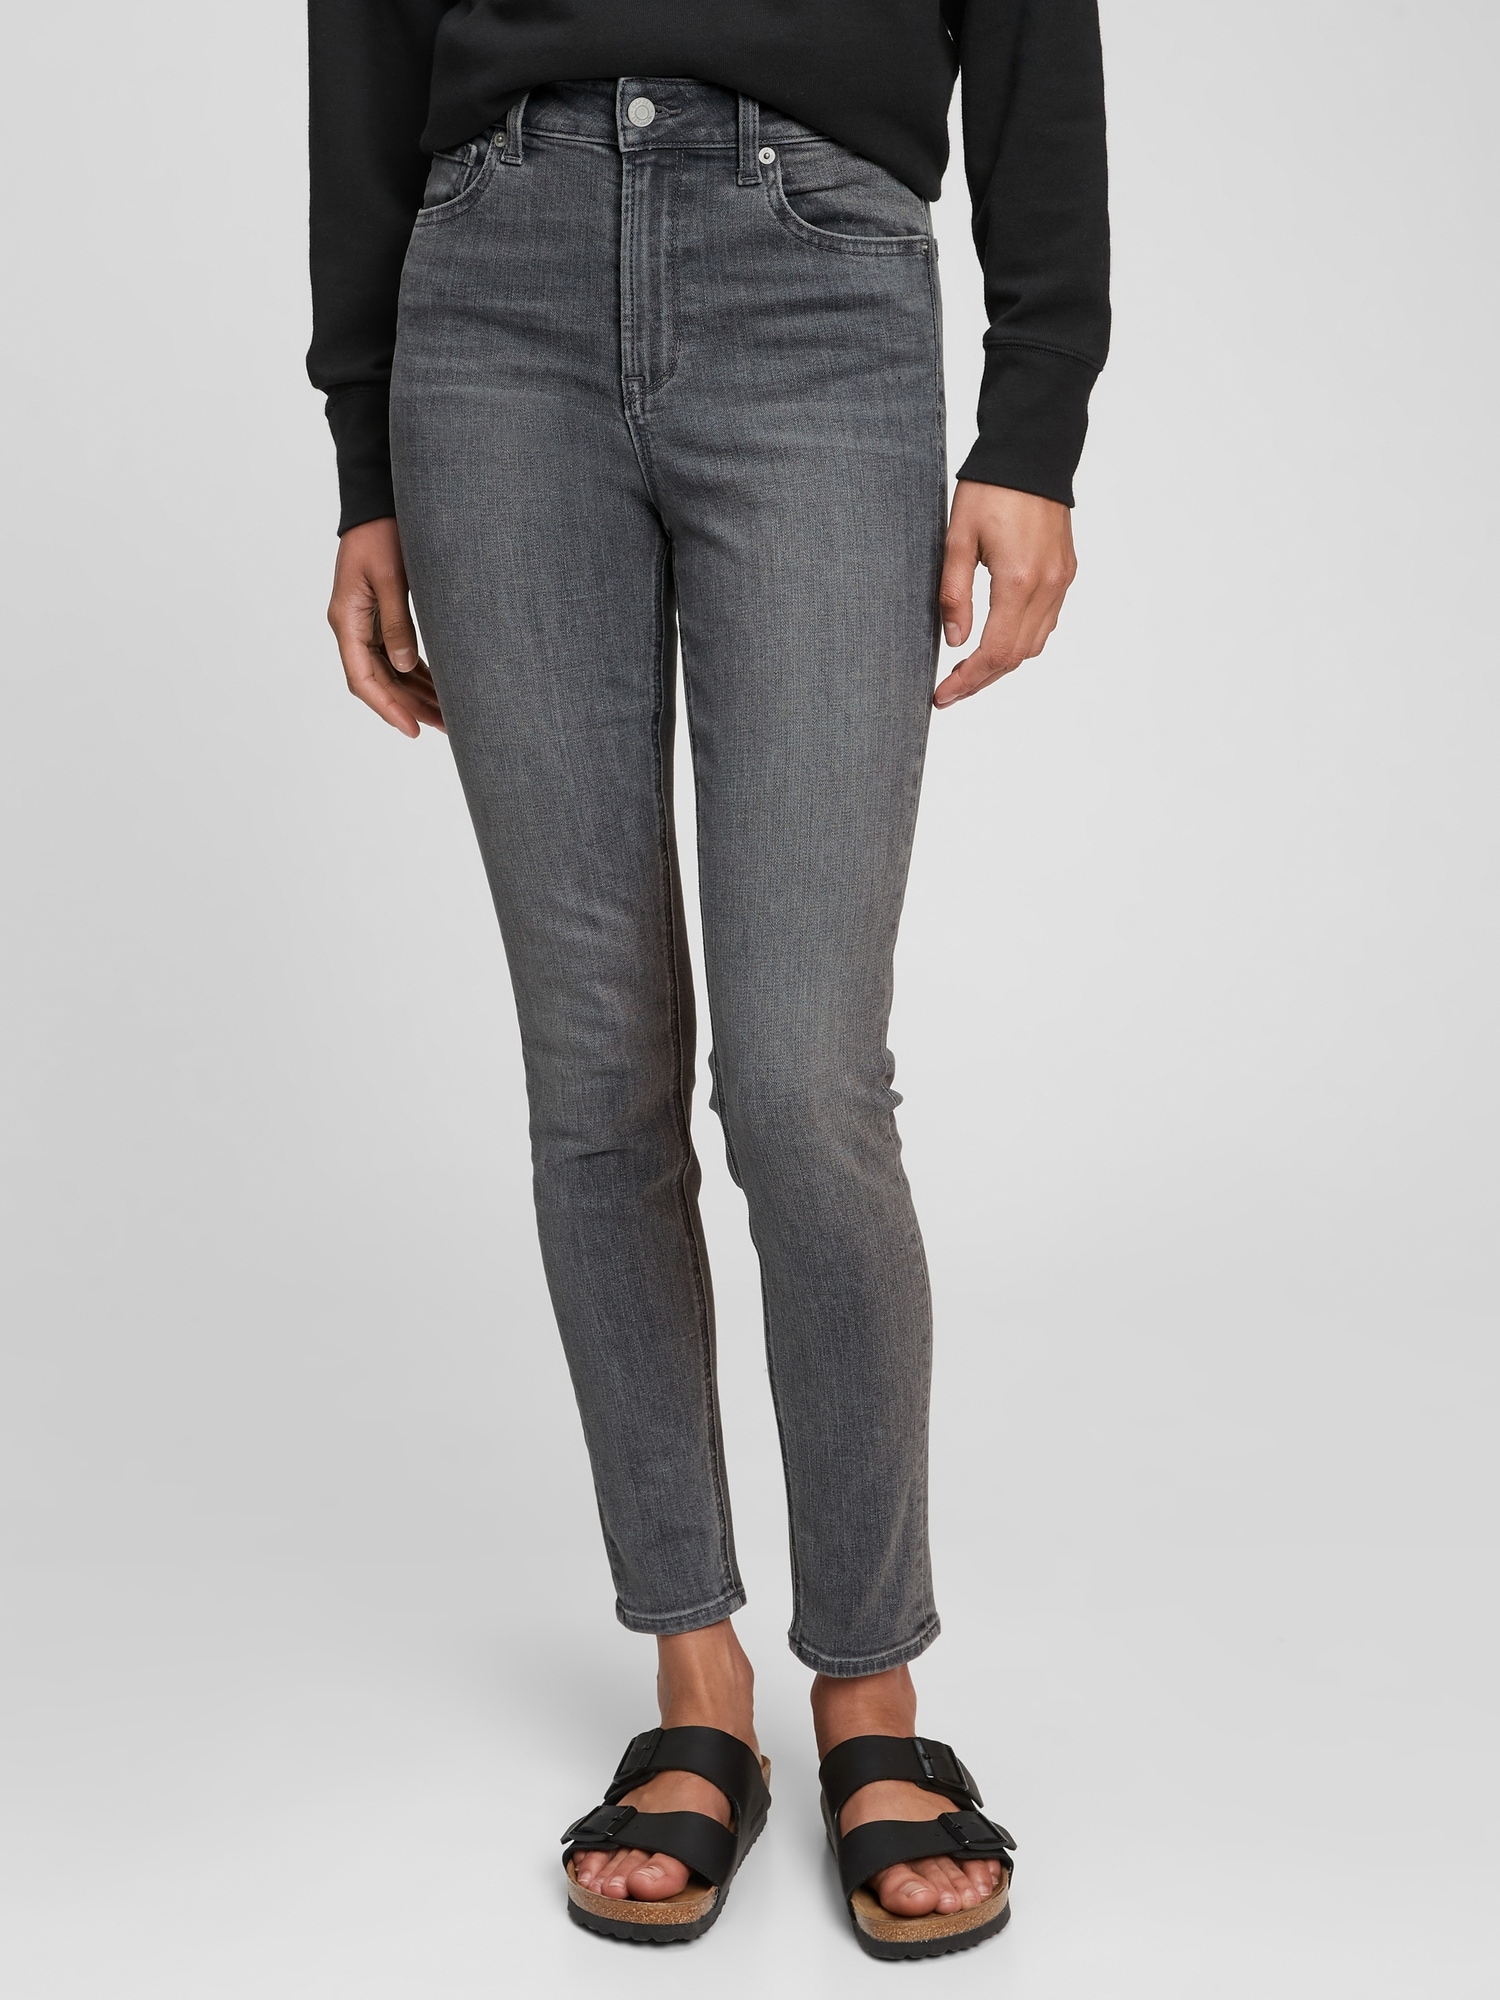 High Rise Universal Legging Jeans with Washwell | Gap Factory